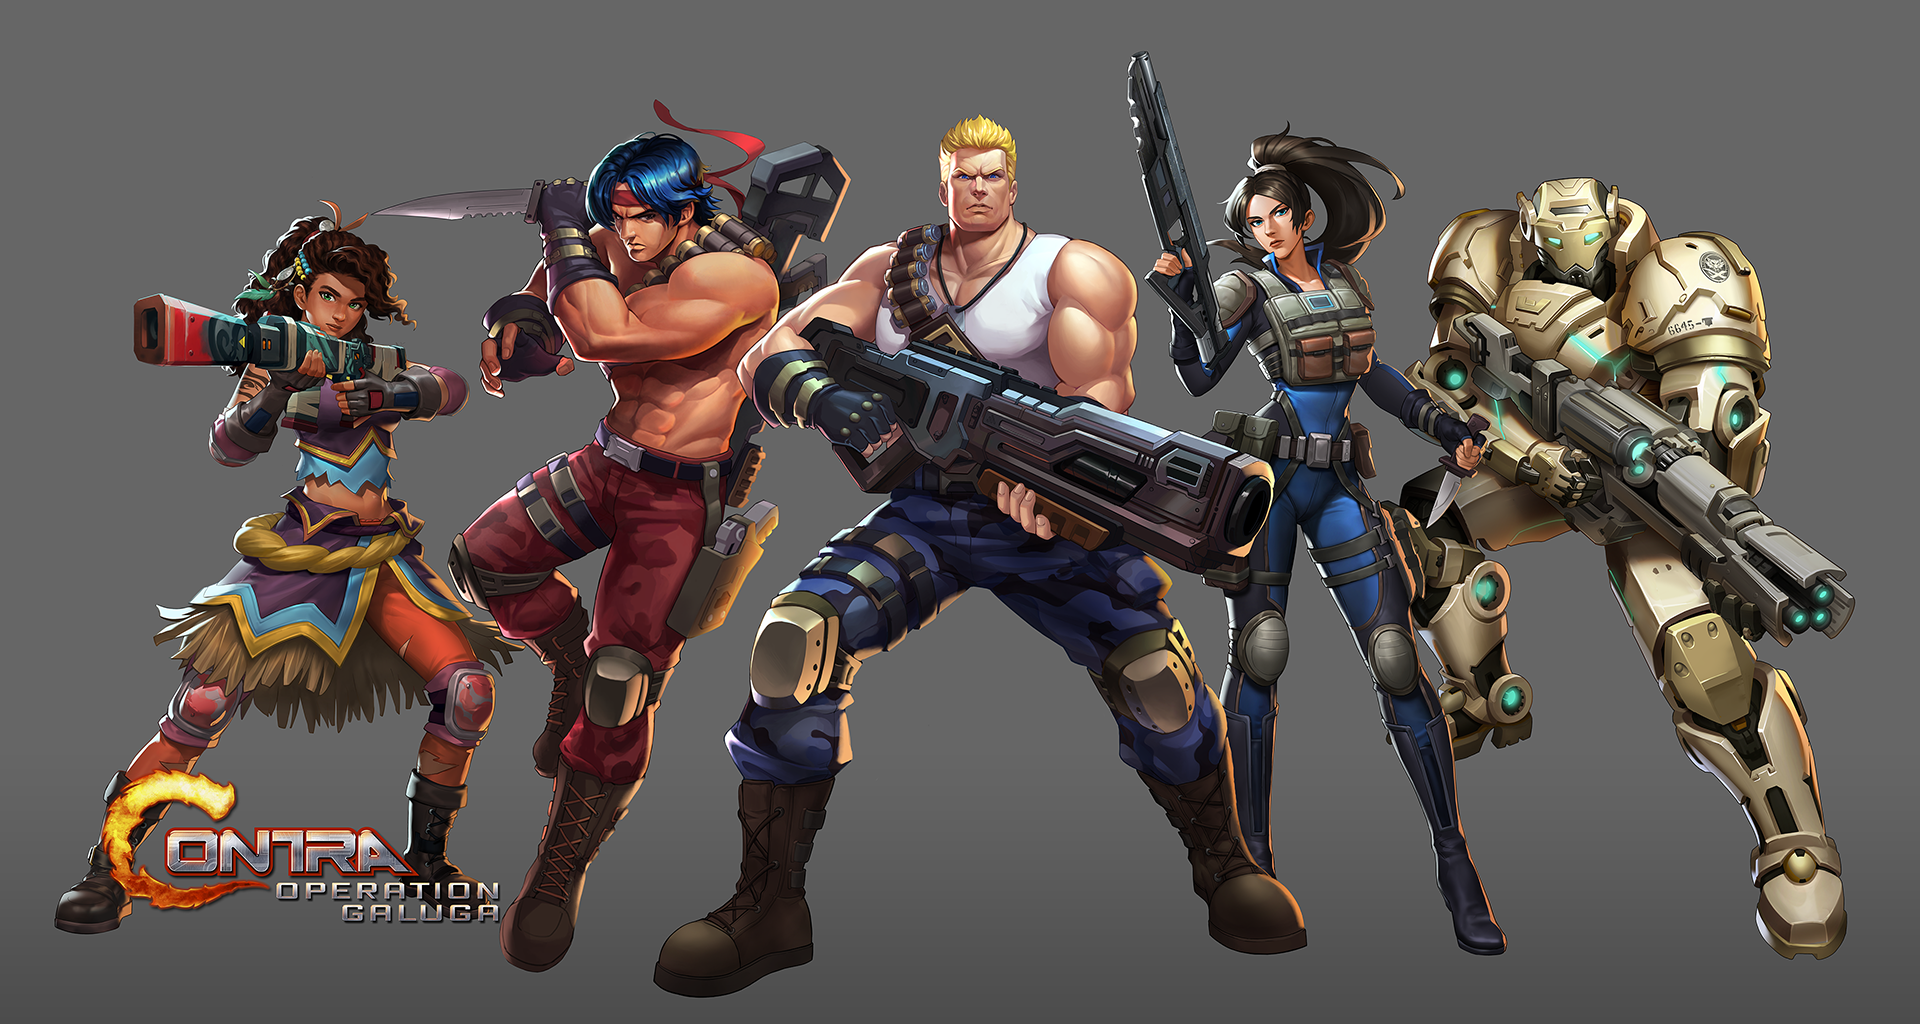 Contra: Operation Galuga Reveals Playable Cast, Gameplay Modes, Screenshots & More